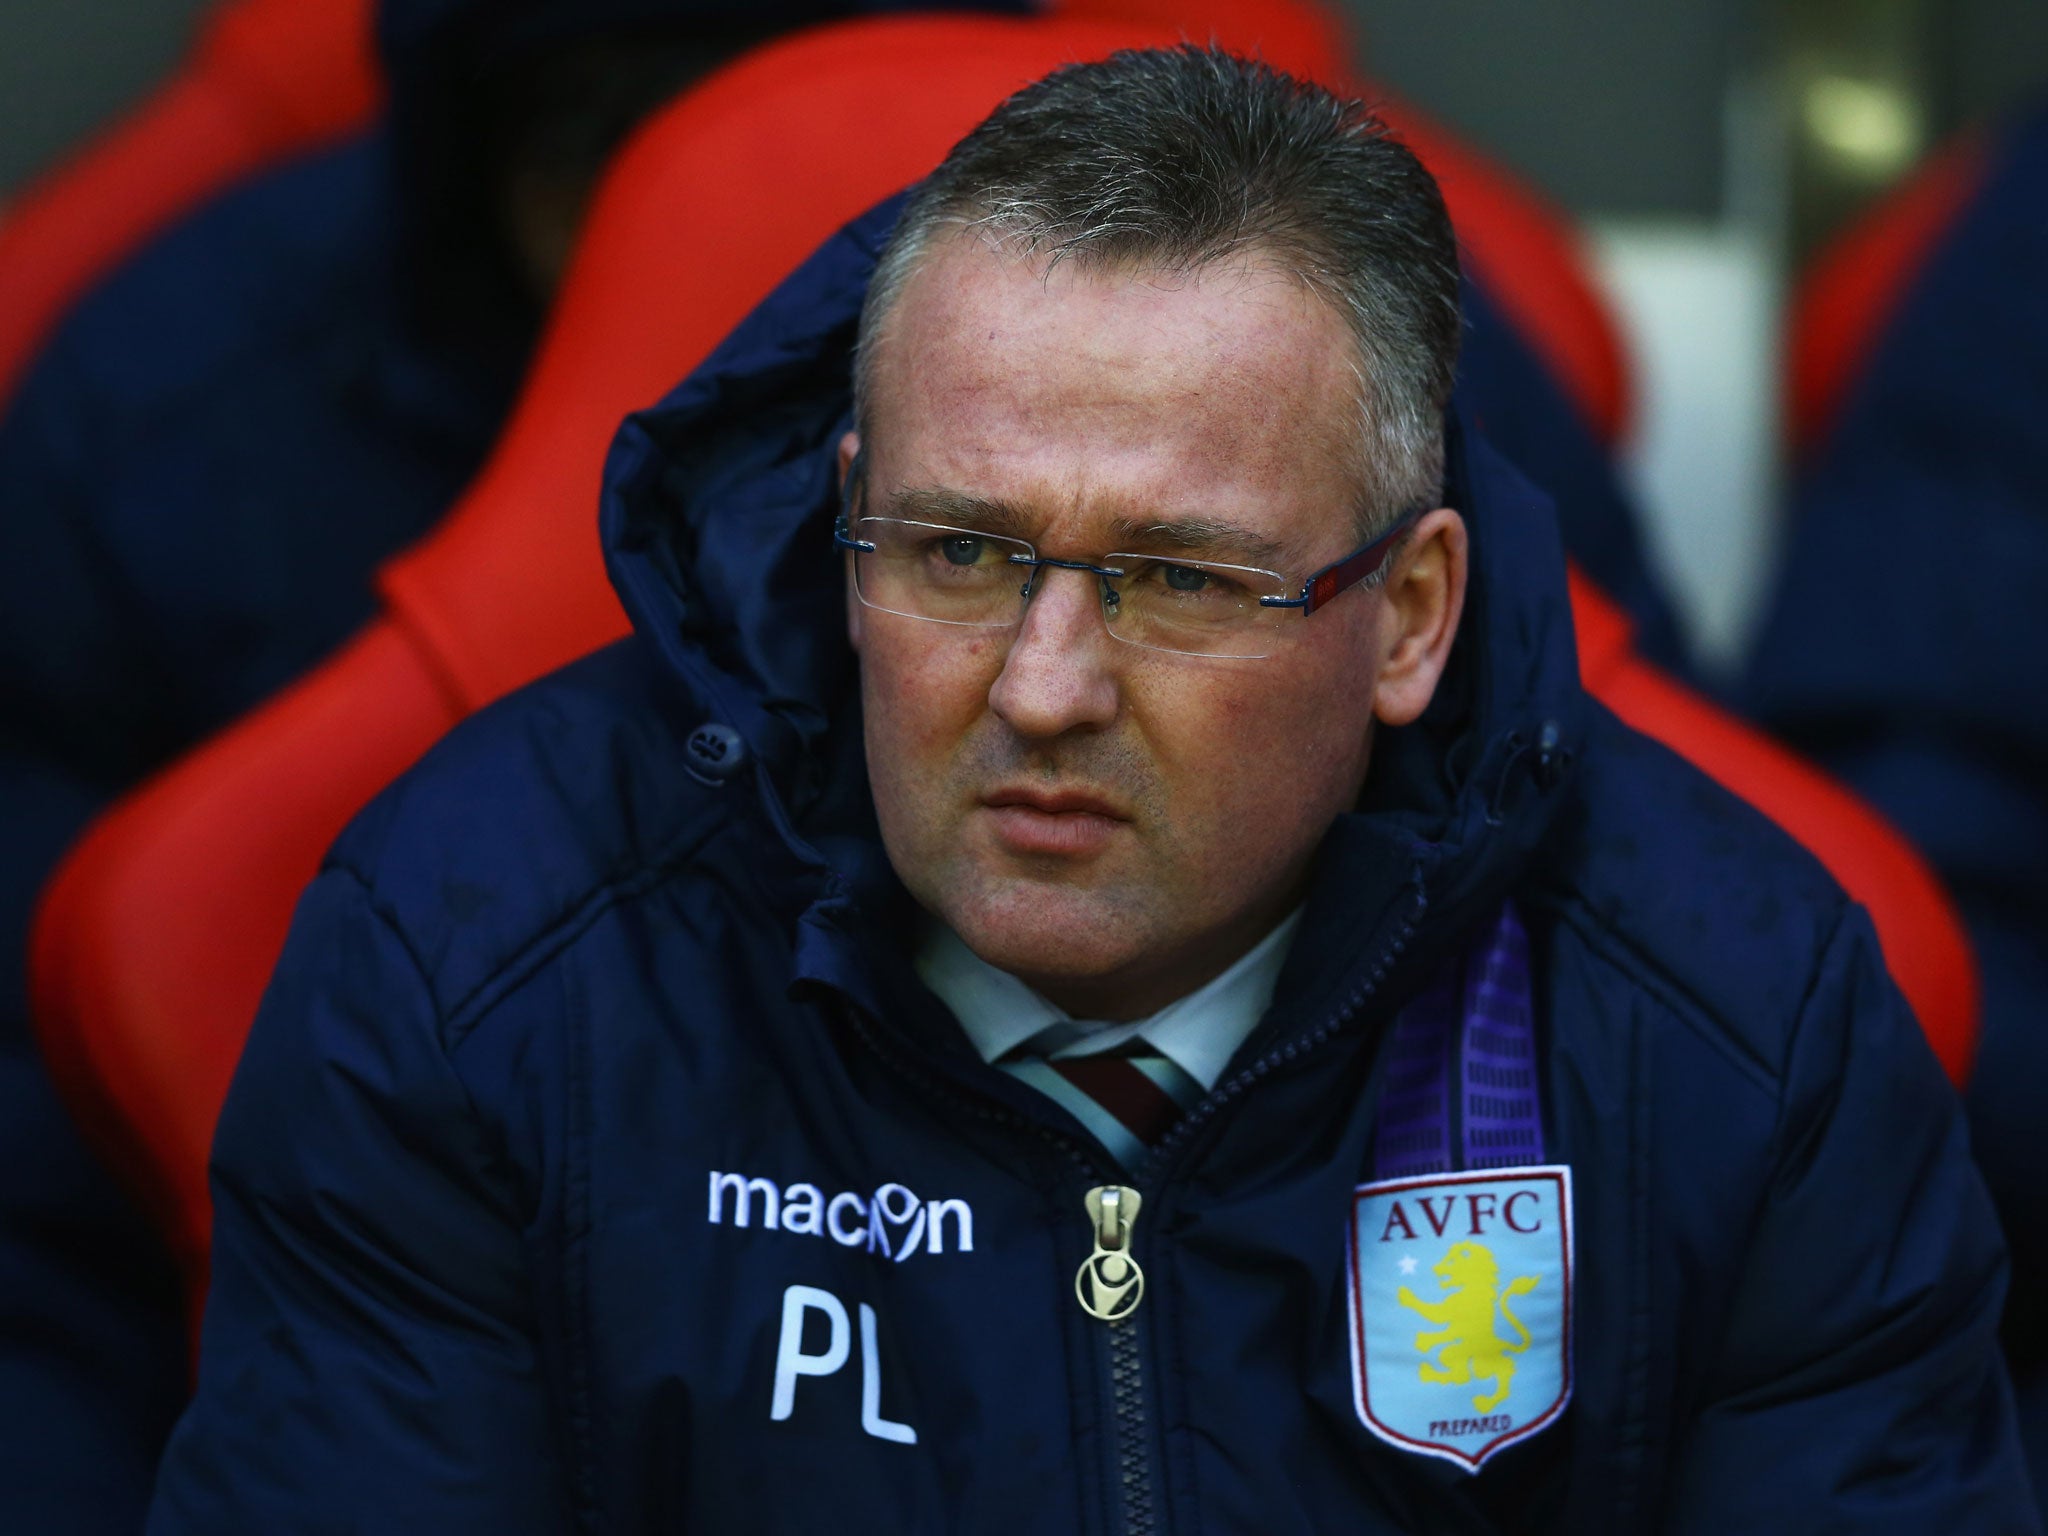 Paul Lambert believes most Premier League managers would rather not play in the FA Cup